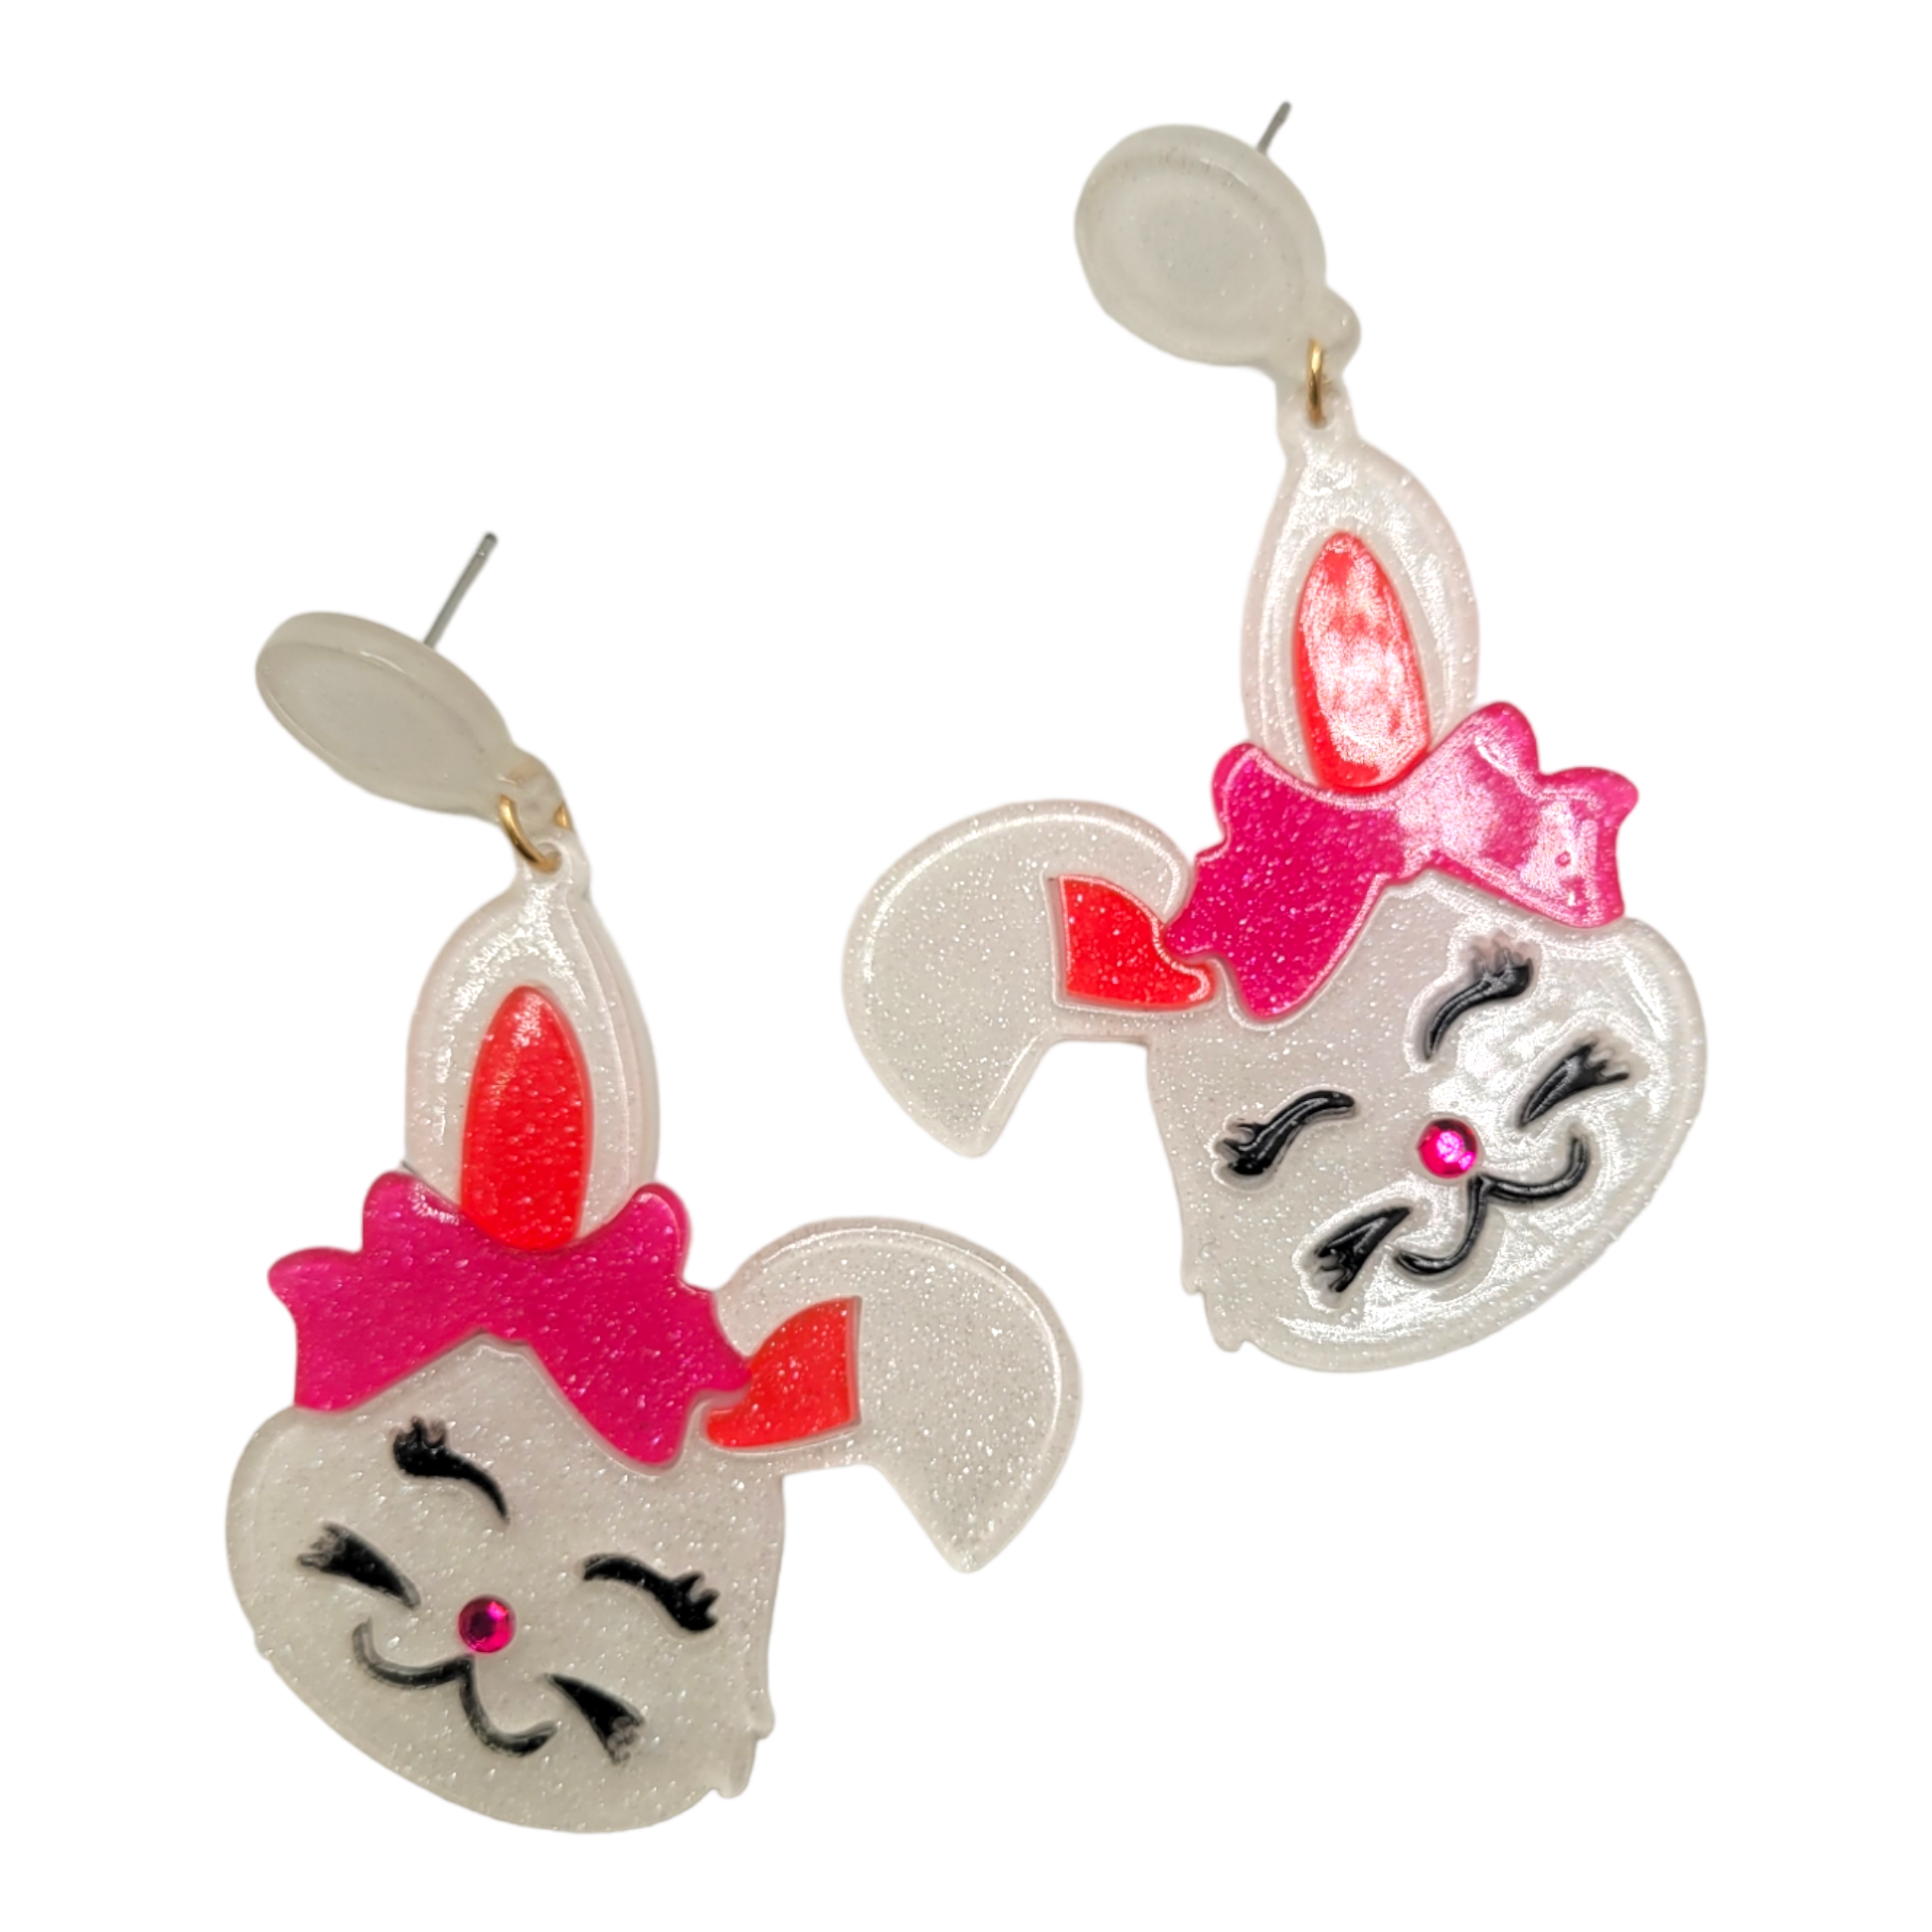 White Bunny & Bow Acrylic Earrings-Earrings-LouisGeorge Boutique-LouisGeorge Boutique, Women’s Fashion Boutique Located in Trussville, Alabama